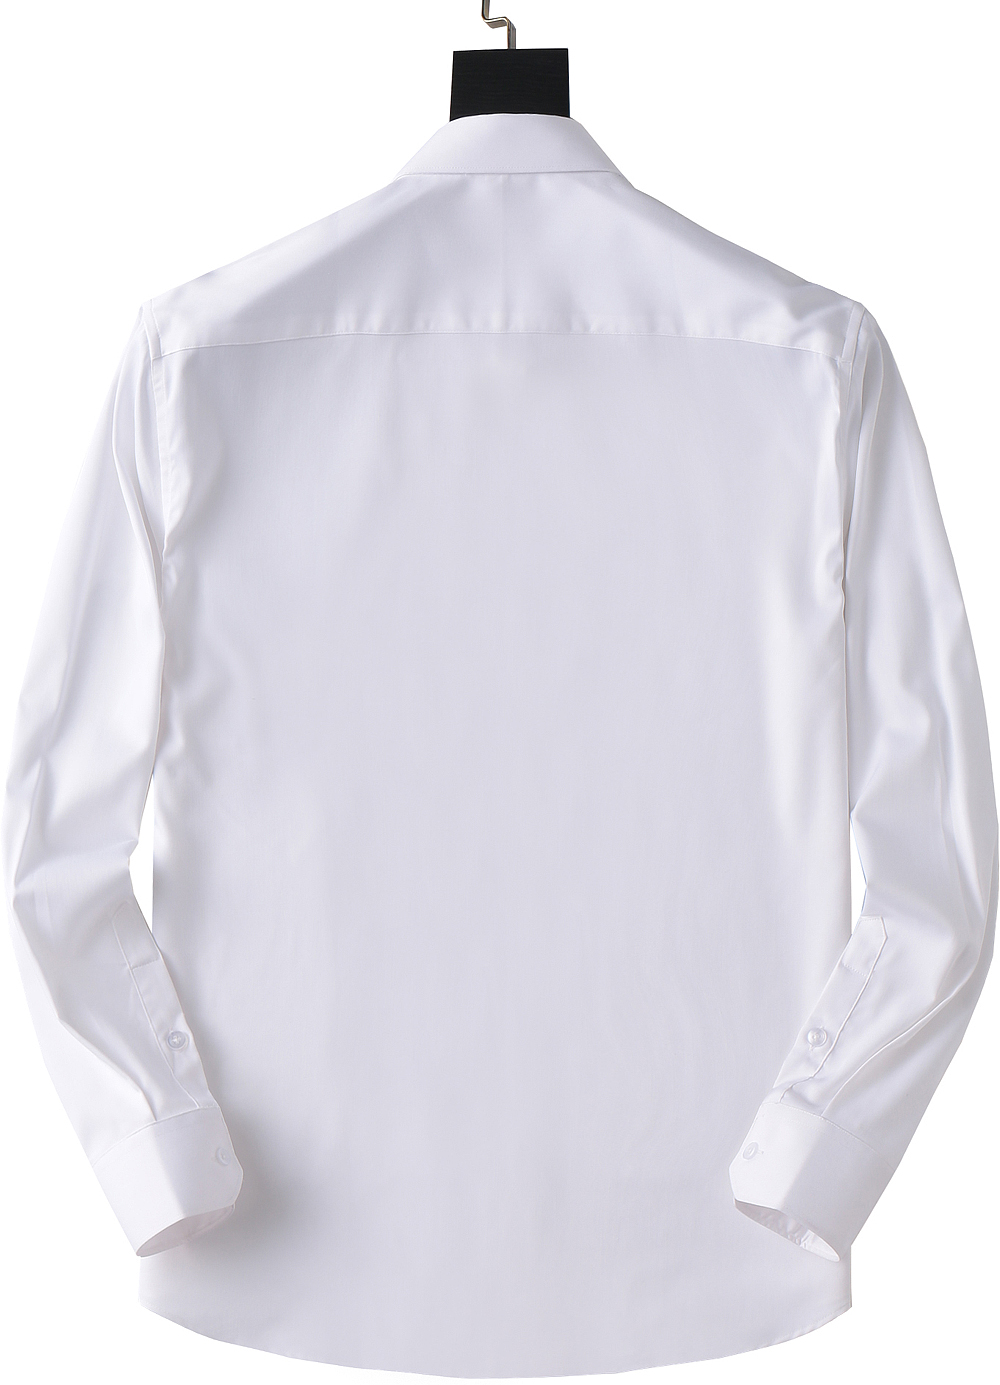 Dior Elastic and Anti Wrinkle Long Sleeve Shirts For Men # 270742, cheap Dior Shirts, only $35!